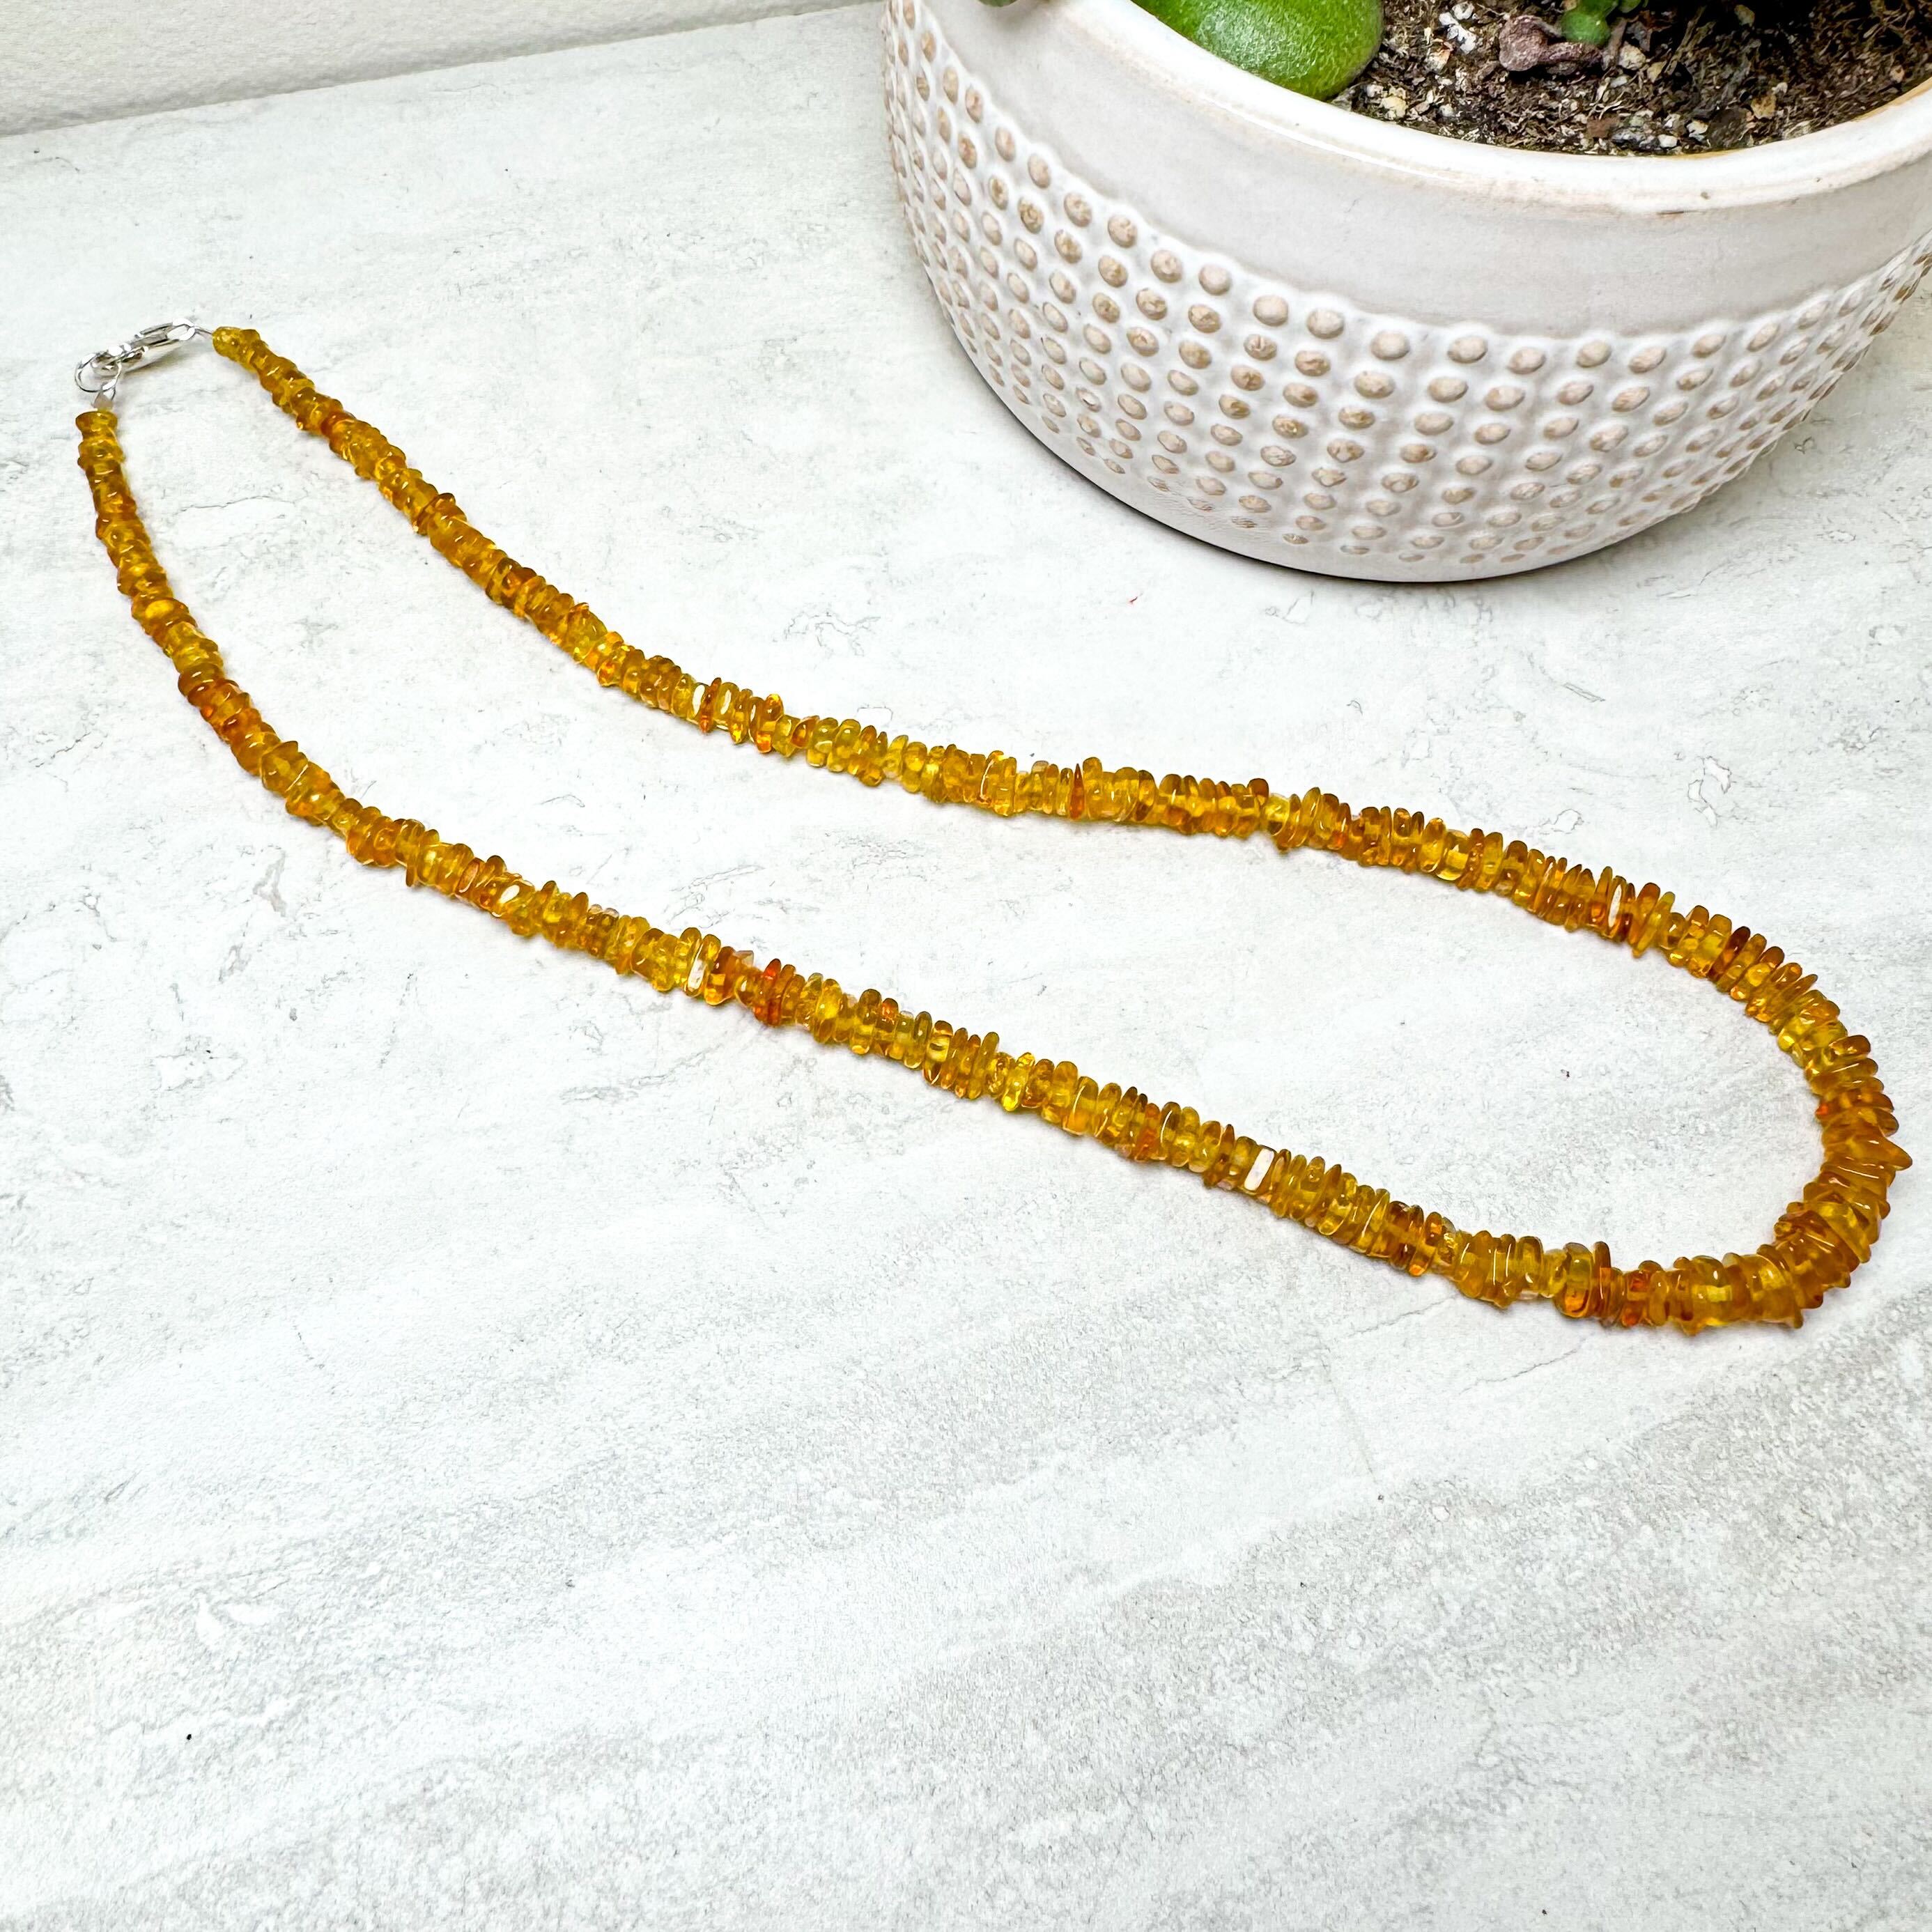 Amber Beaded Necklaces